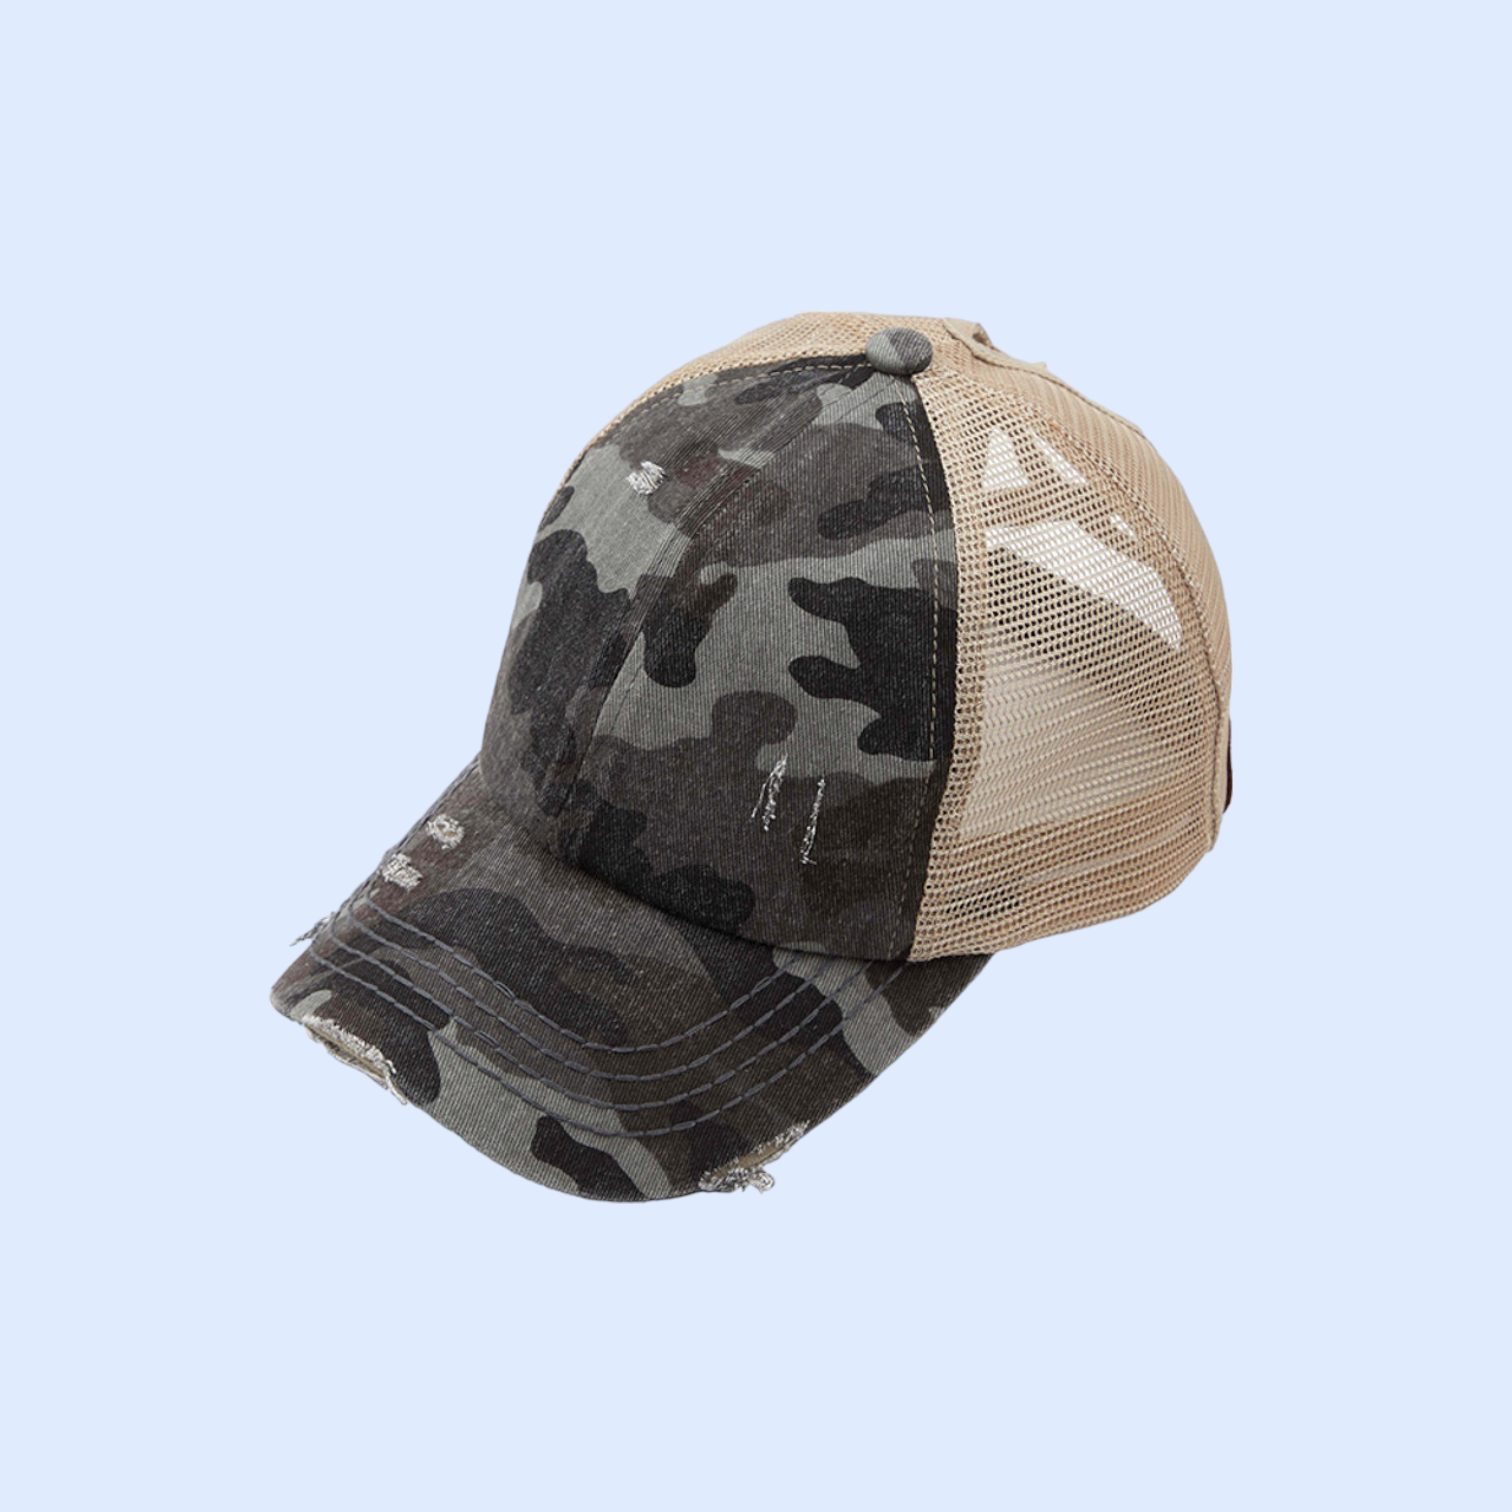 Distressed Camouflage Criss-CrossHigh Ponytail Ball Cap BT783